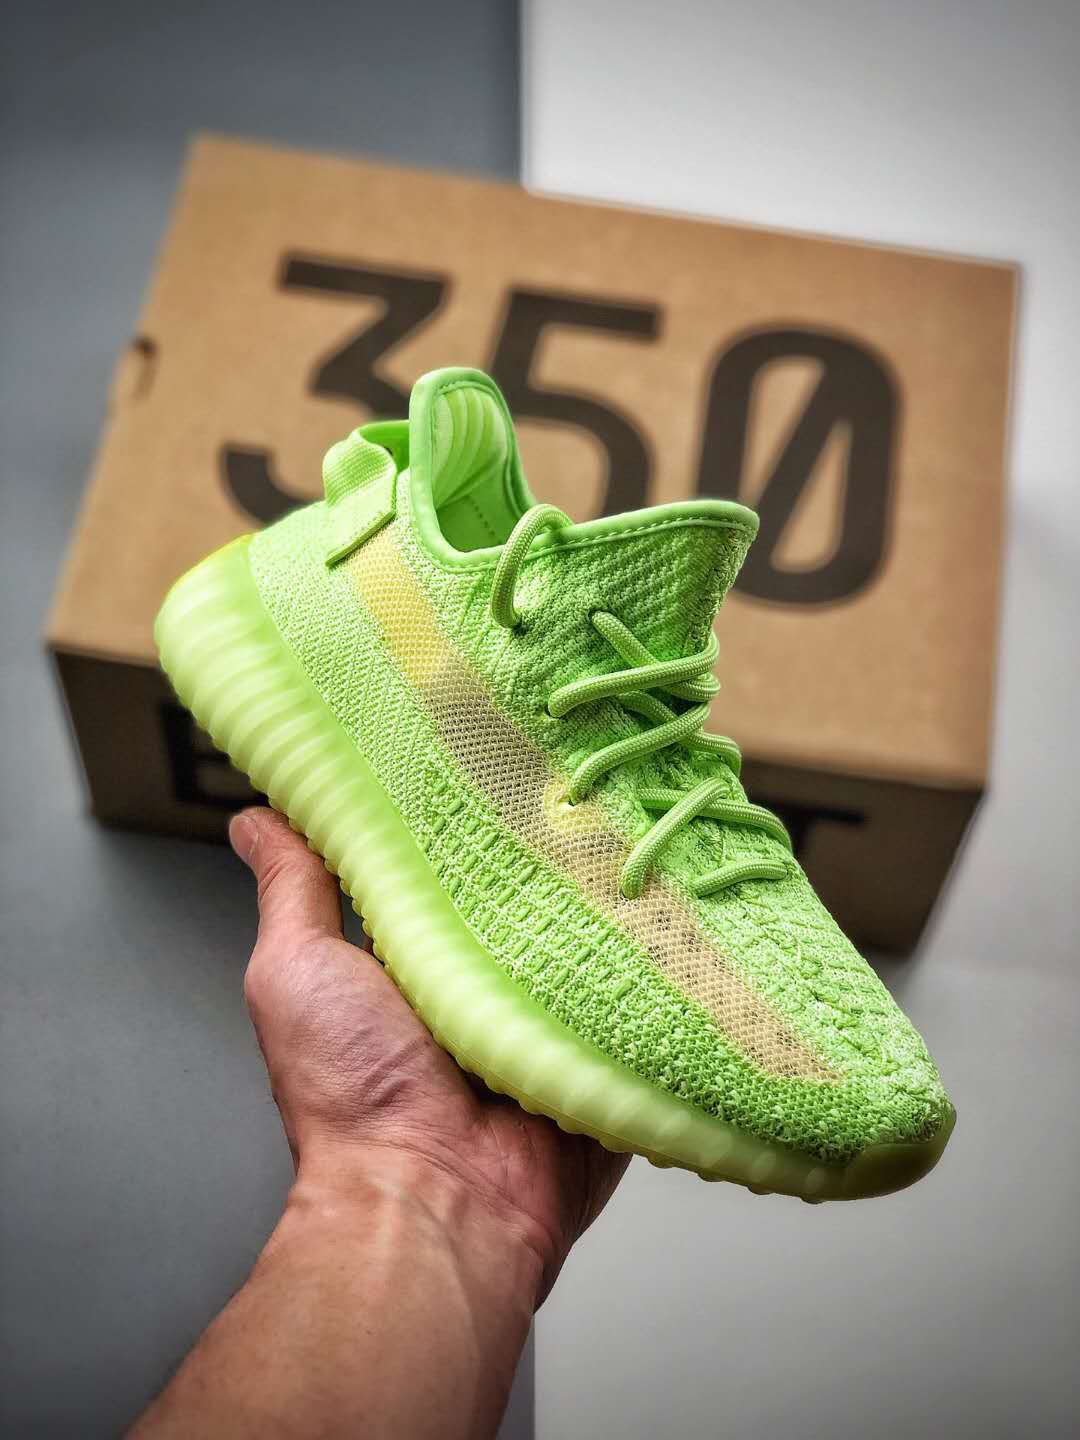 Adidas Yeezy Boost 350 V2 GID 'Glow' EG5293 - Limited Edition Glow-in-the-Dark Sneakers